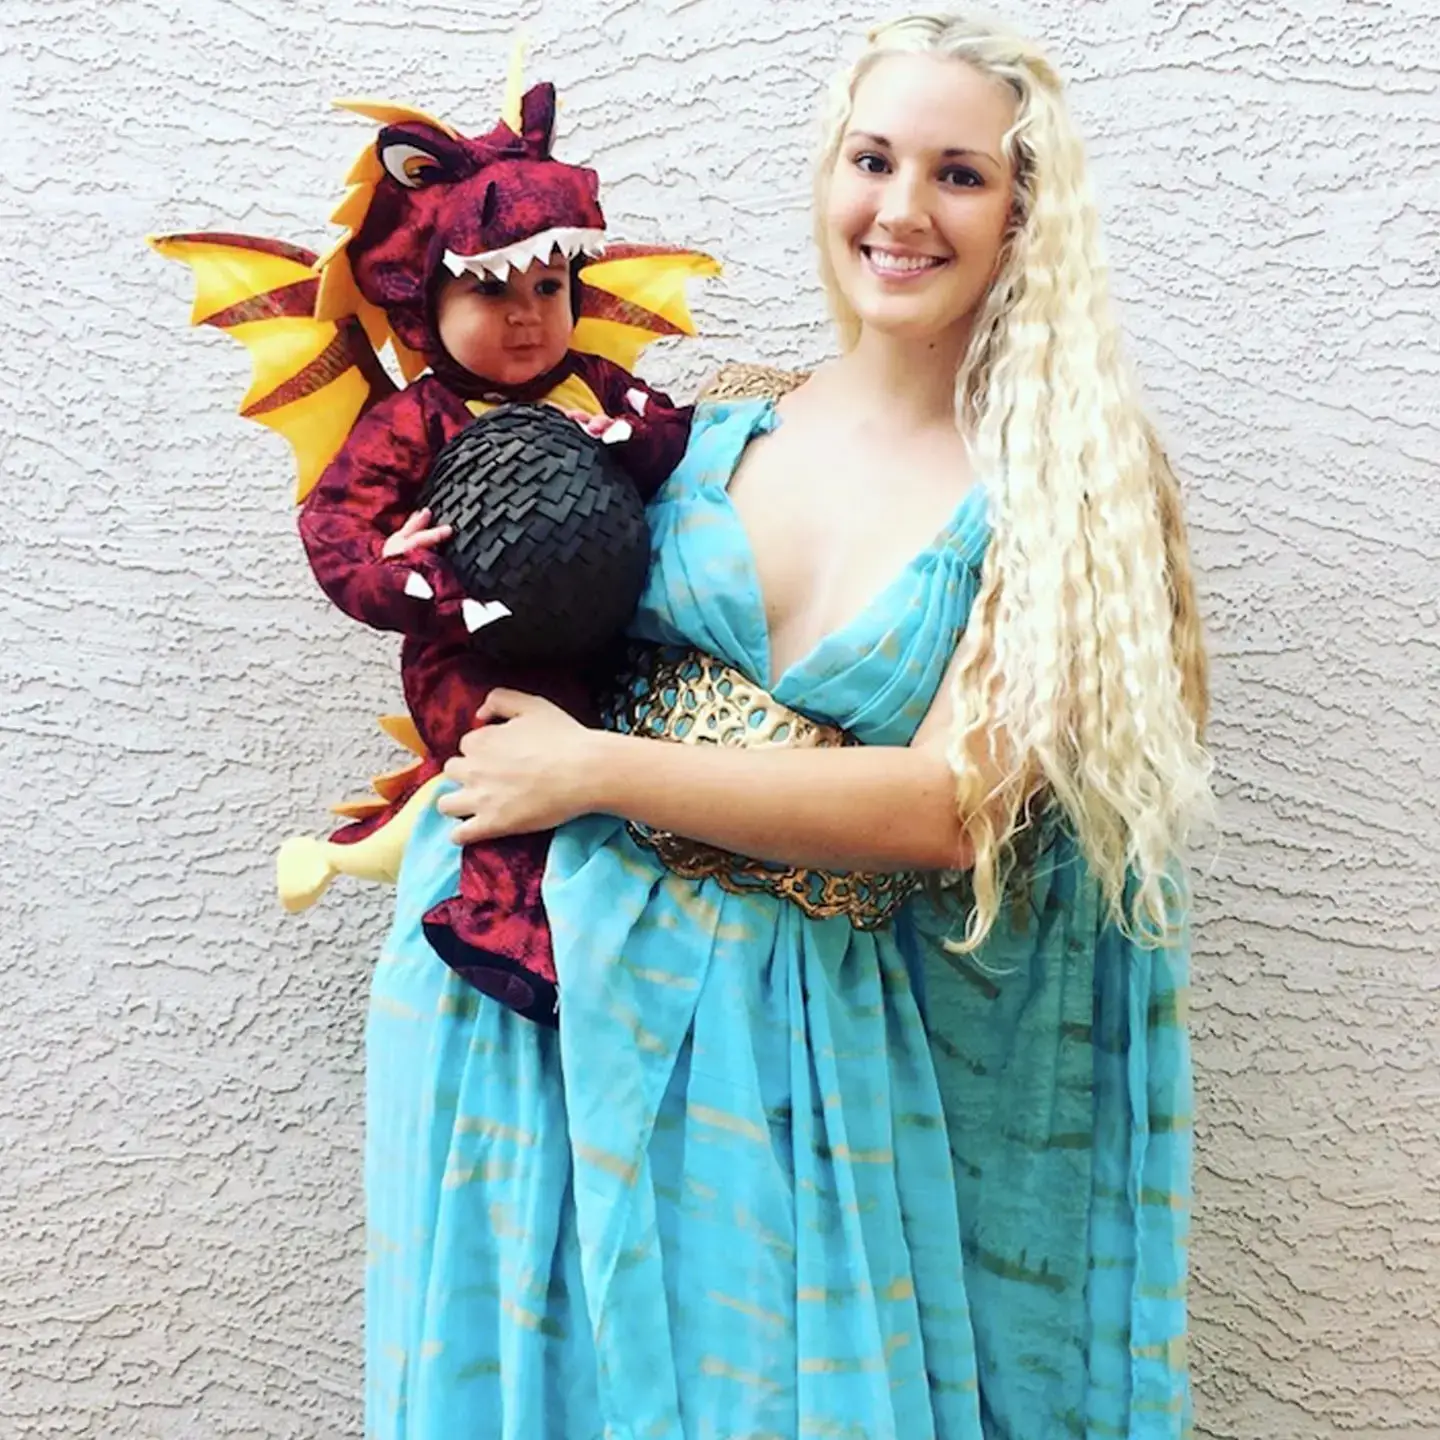 10 Clever Adorable Mother And Son Costume Ideas For Cosplay